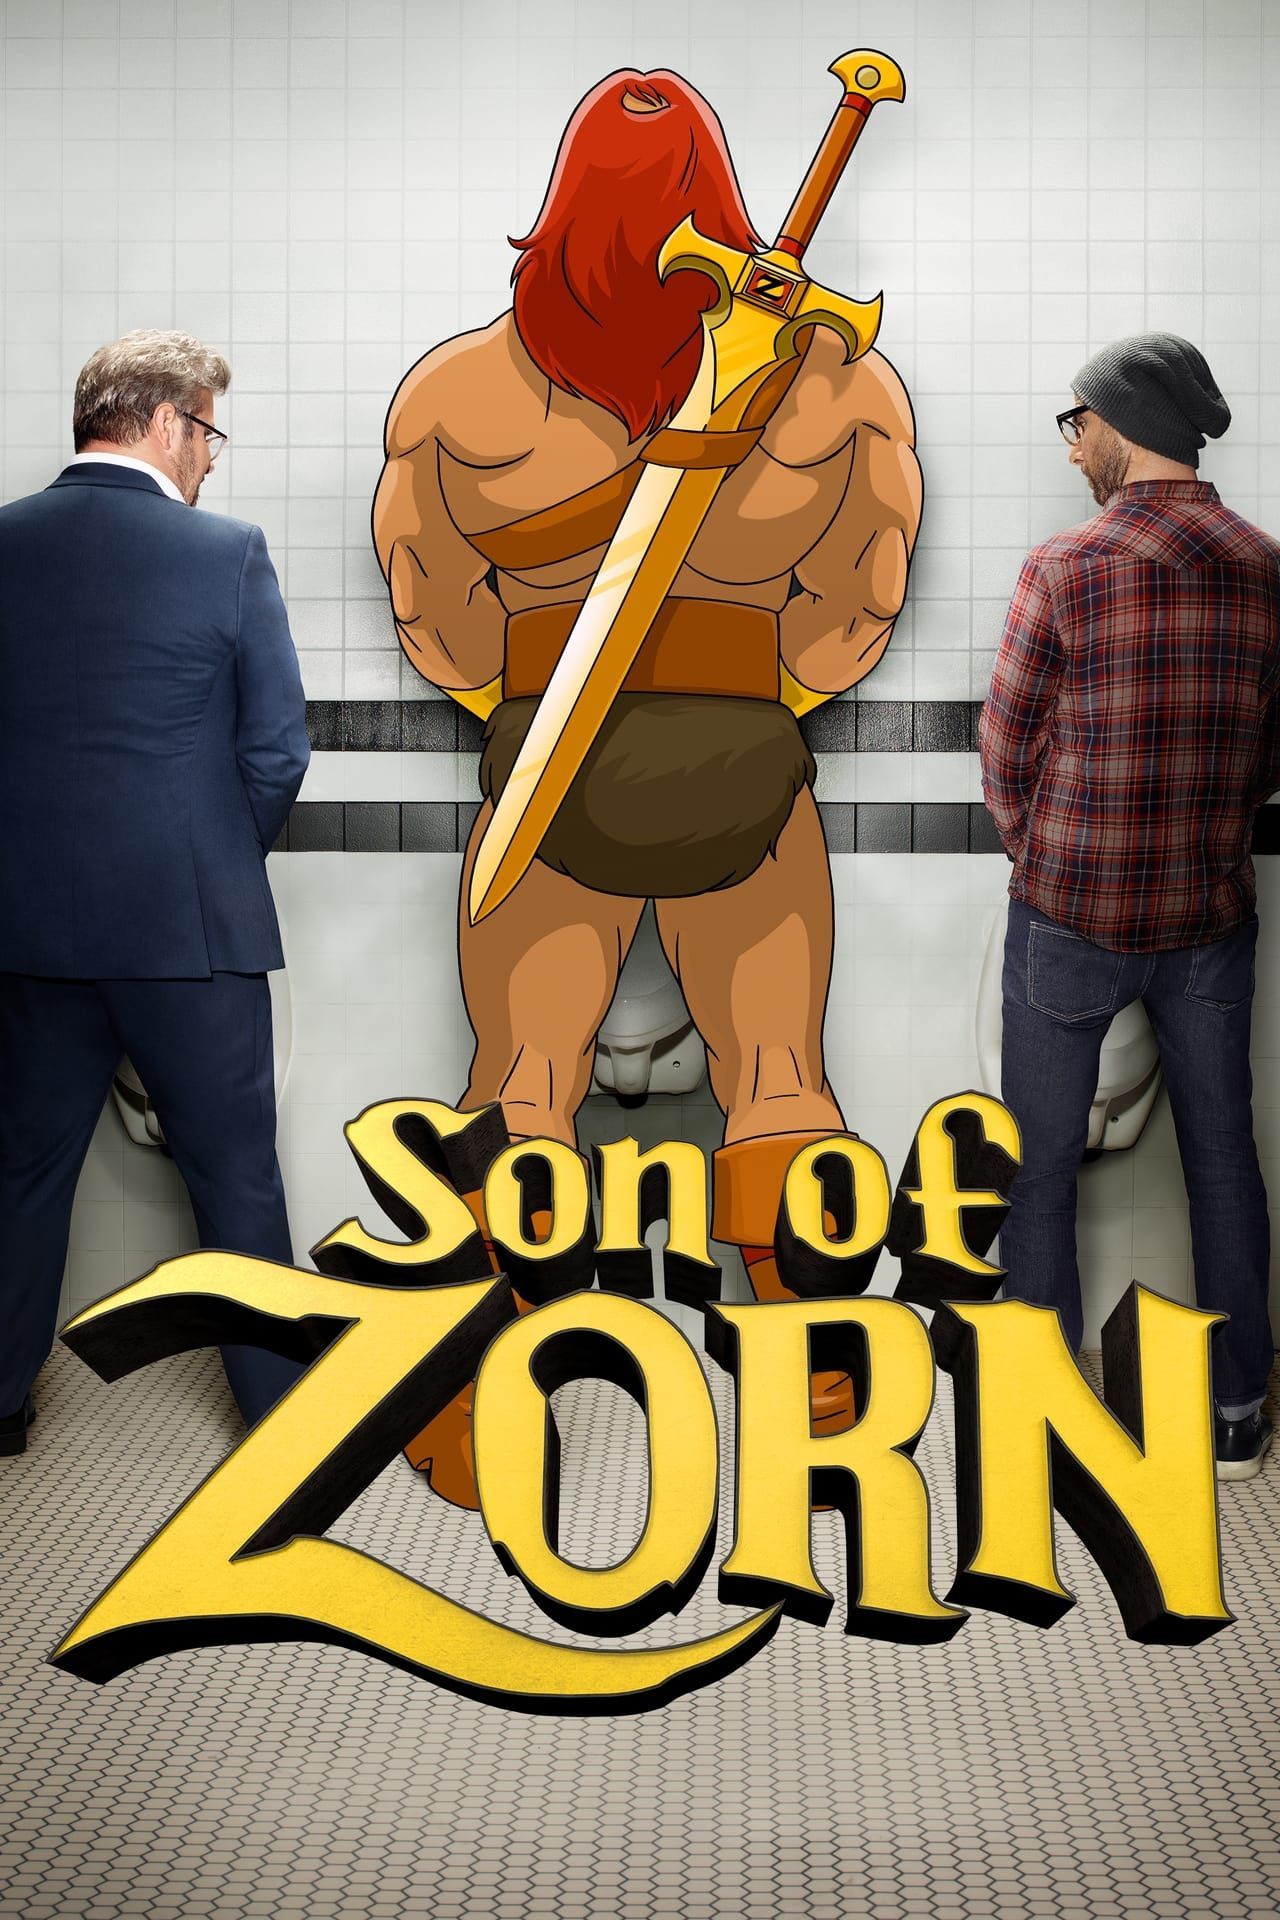 son-of-zorn_tv-show_poster.jpeg